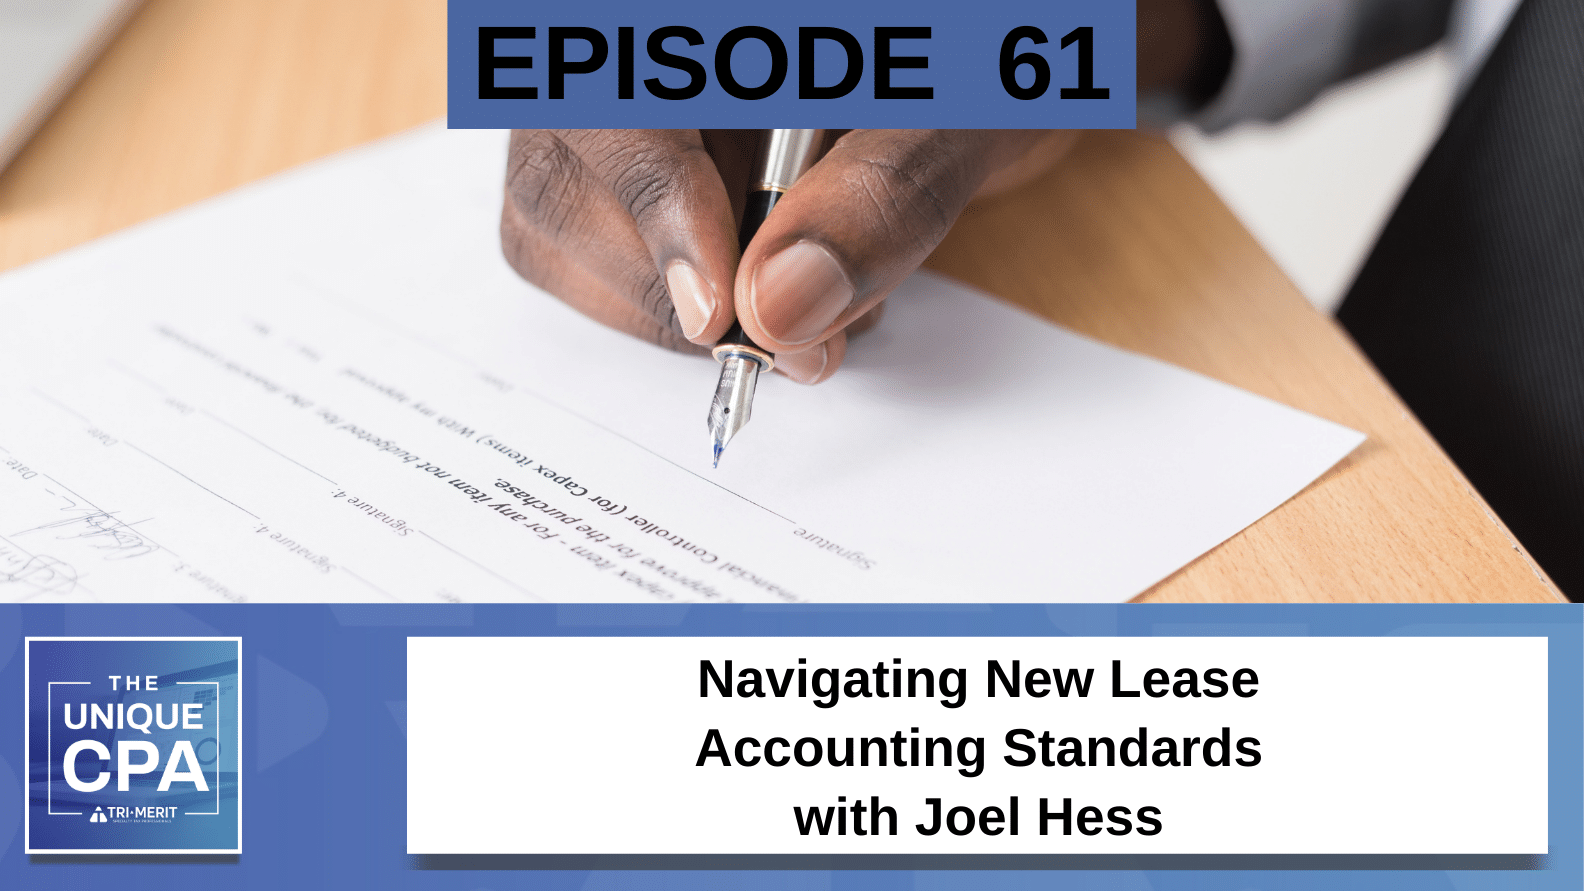 Unique Cpa Featured Image Ep 61 Joel Hess - Navigating New Lease Accounting Standards - Tri-Merit